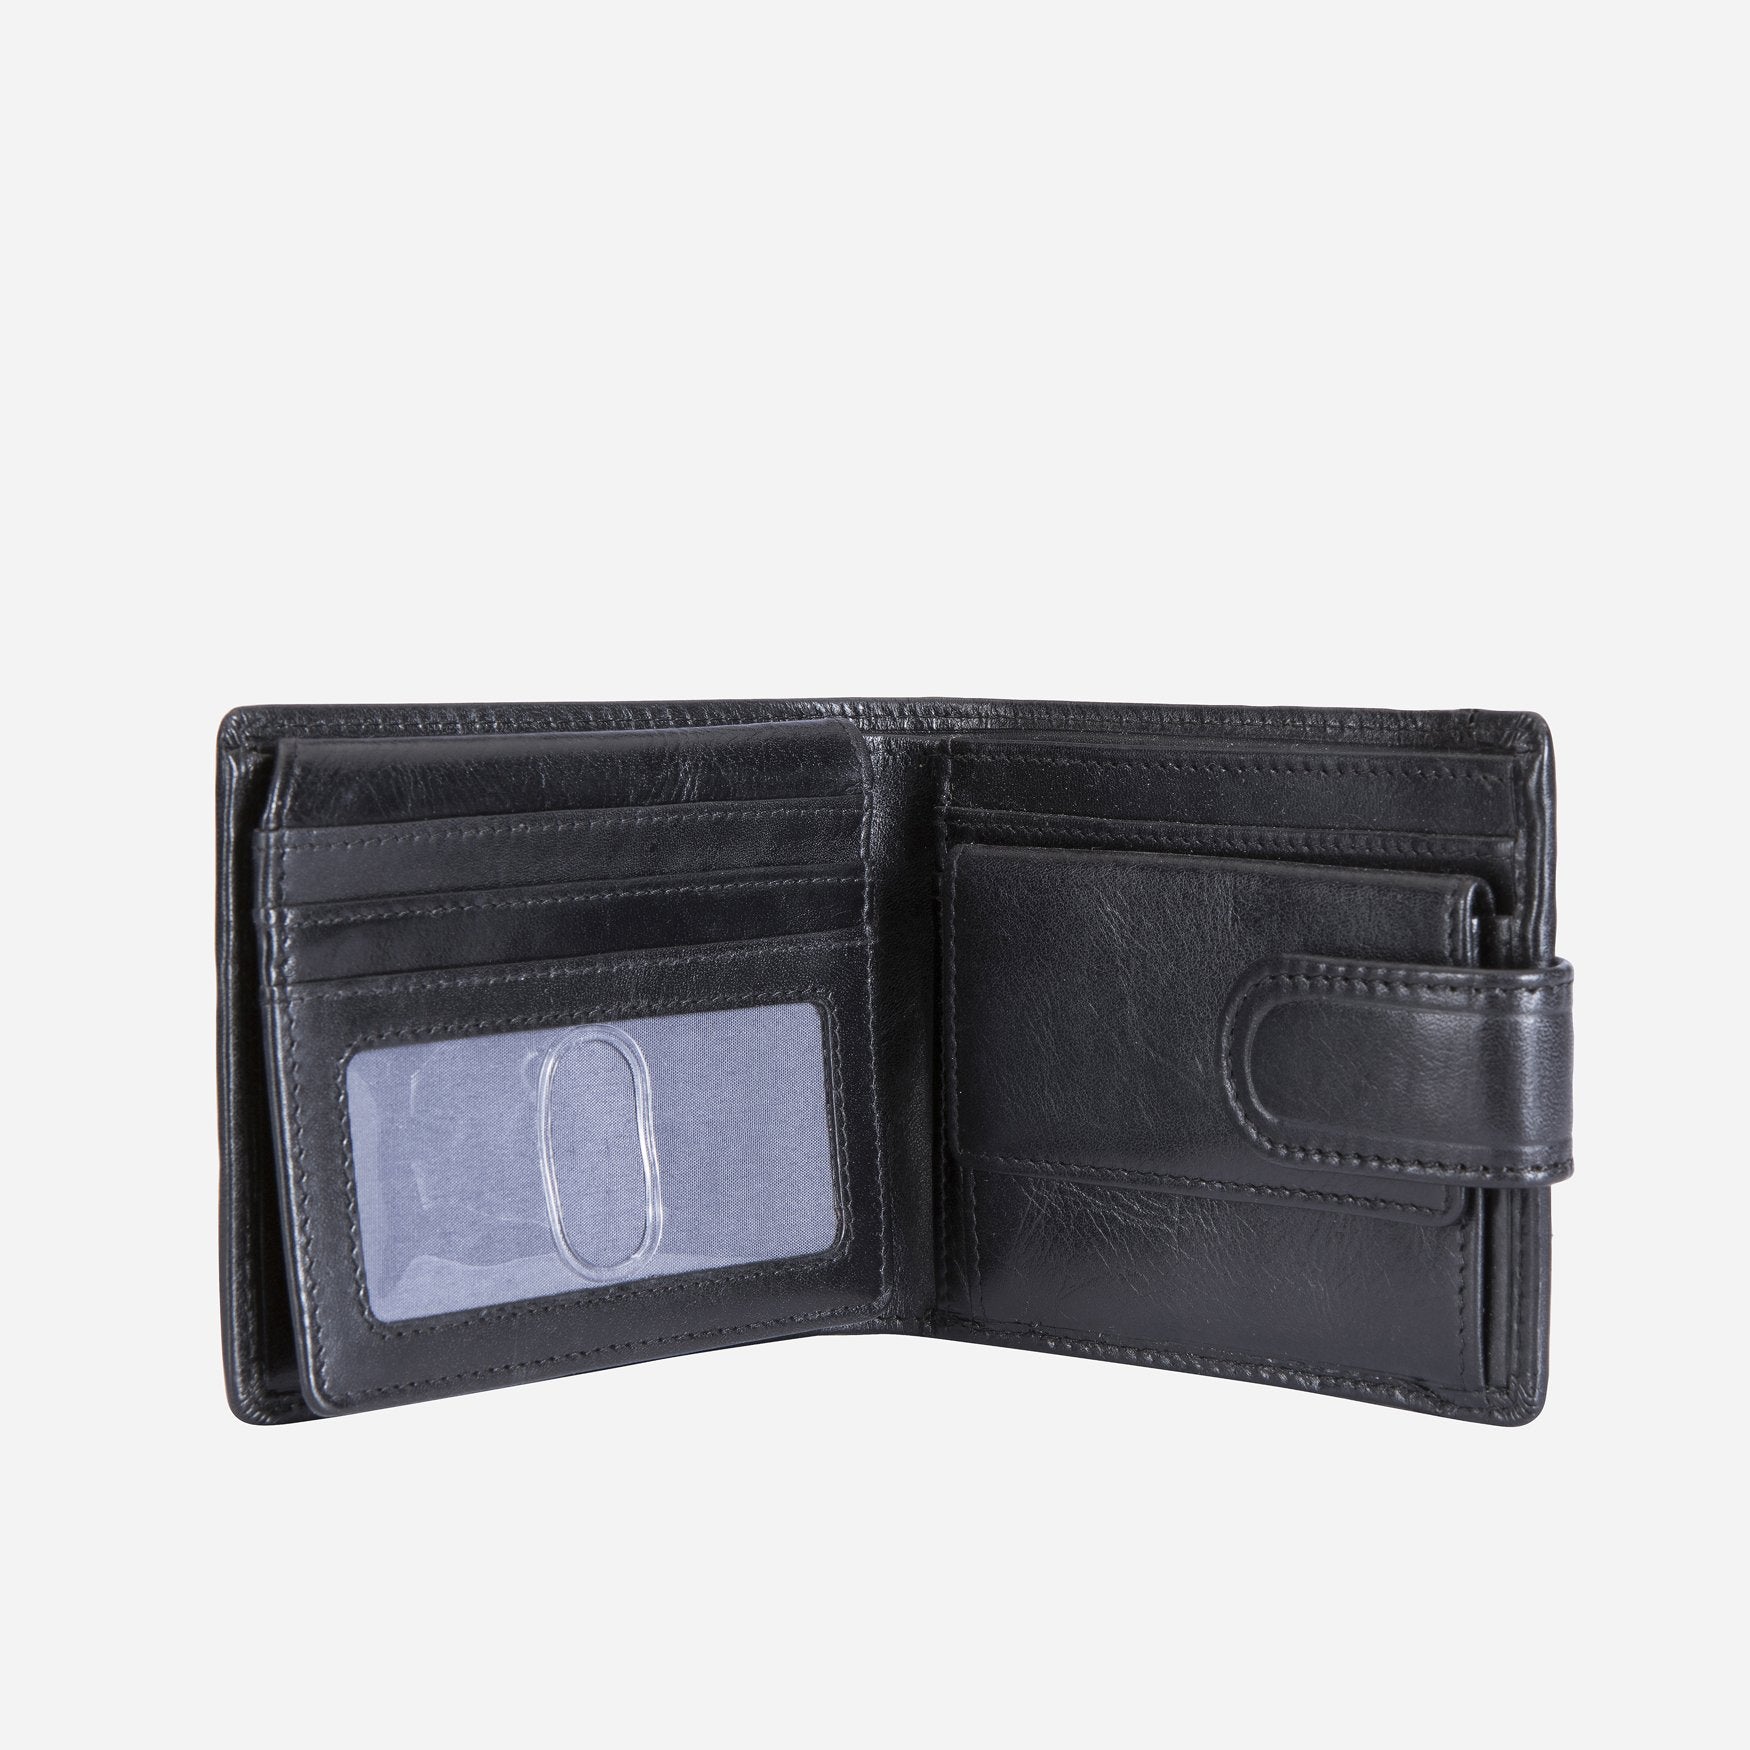 Bifold Wallet With Coin And Tab Closure Bi Fold Wallet Oxford    - Jekyll and Hide Australia